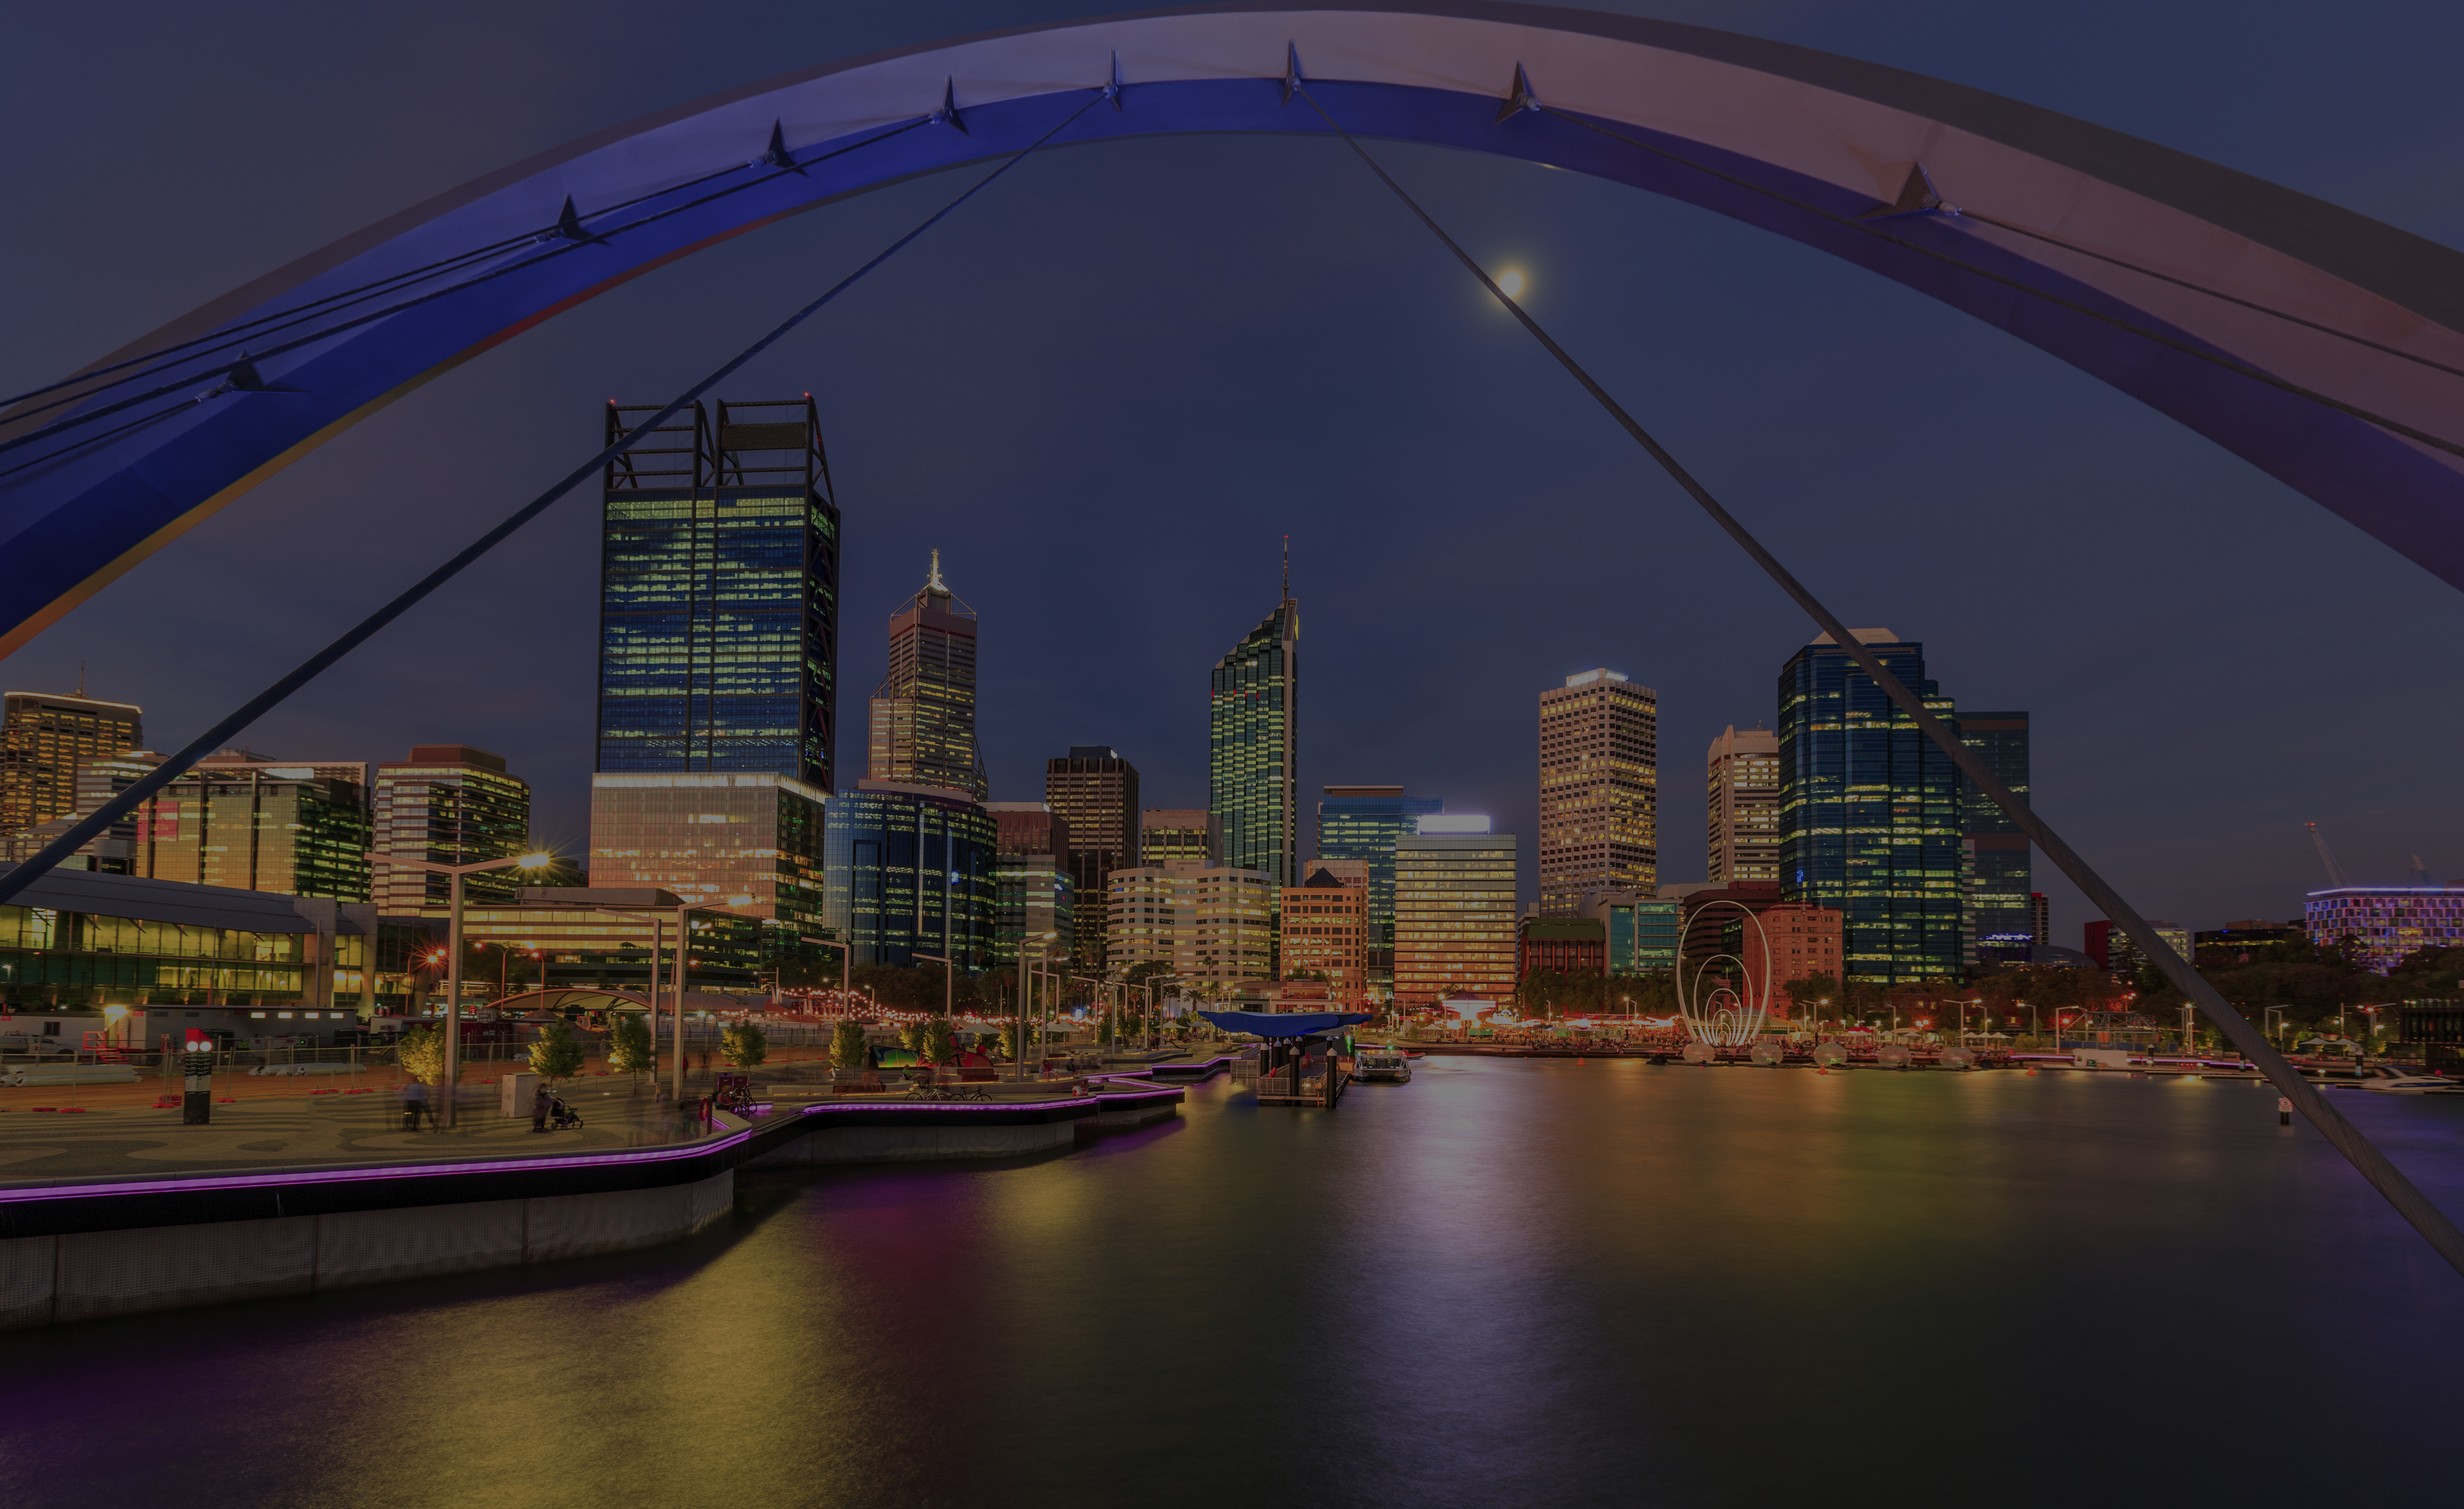 Long exposure of Elizabeth Quay Perth Western Australia just after sunset with the moon in the sky.